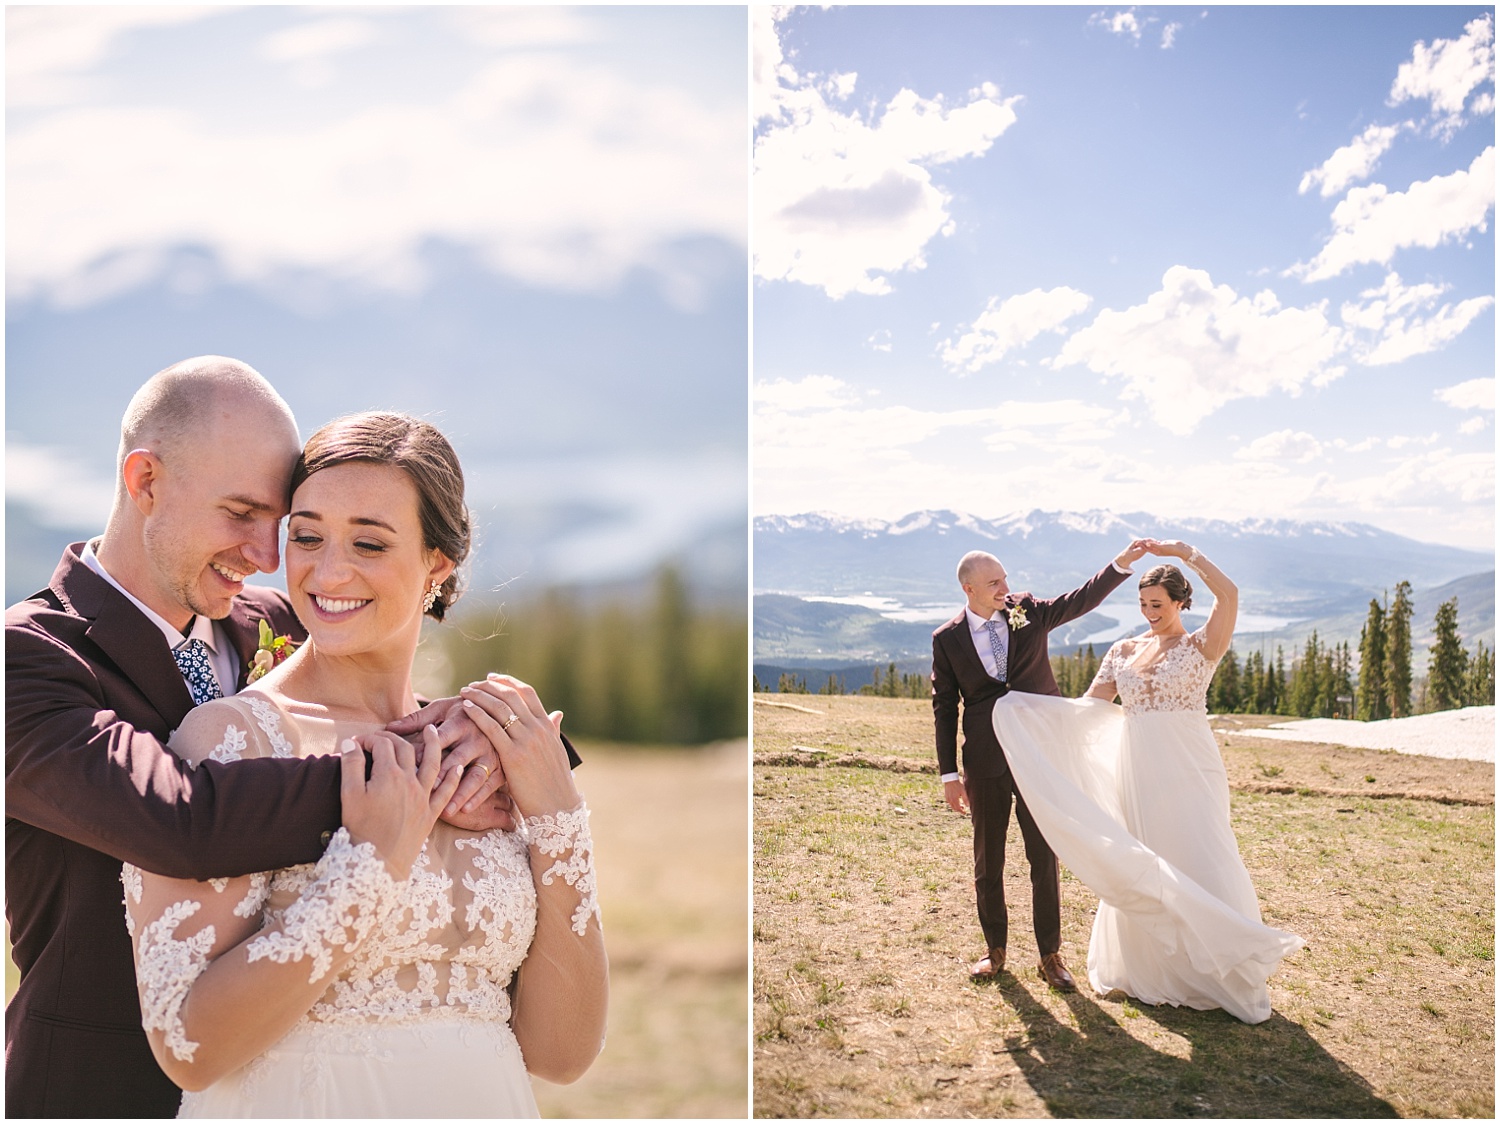 Bride and groom dance together at the summit of Keystone Colorado